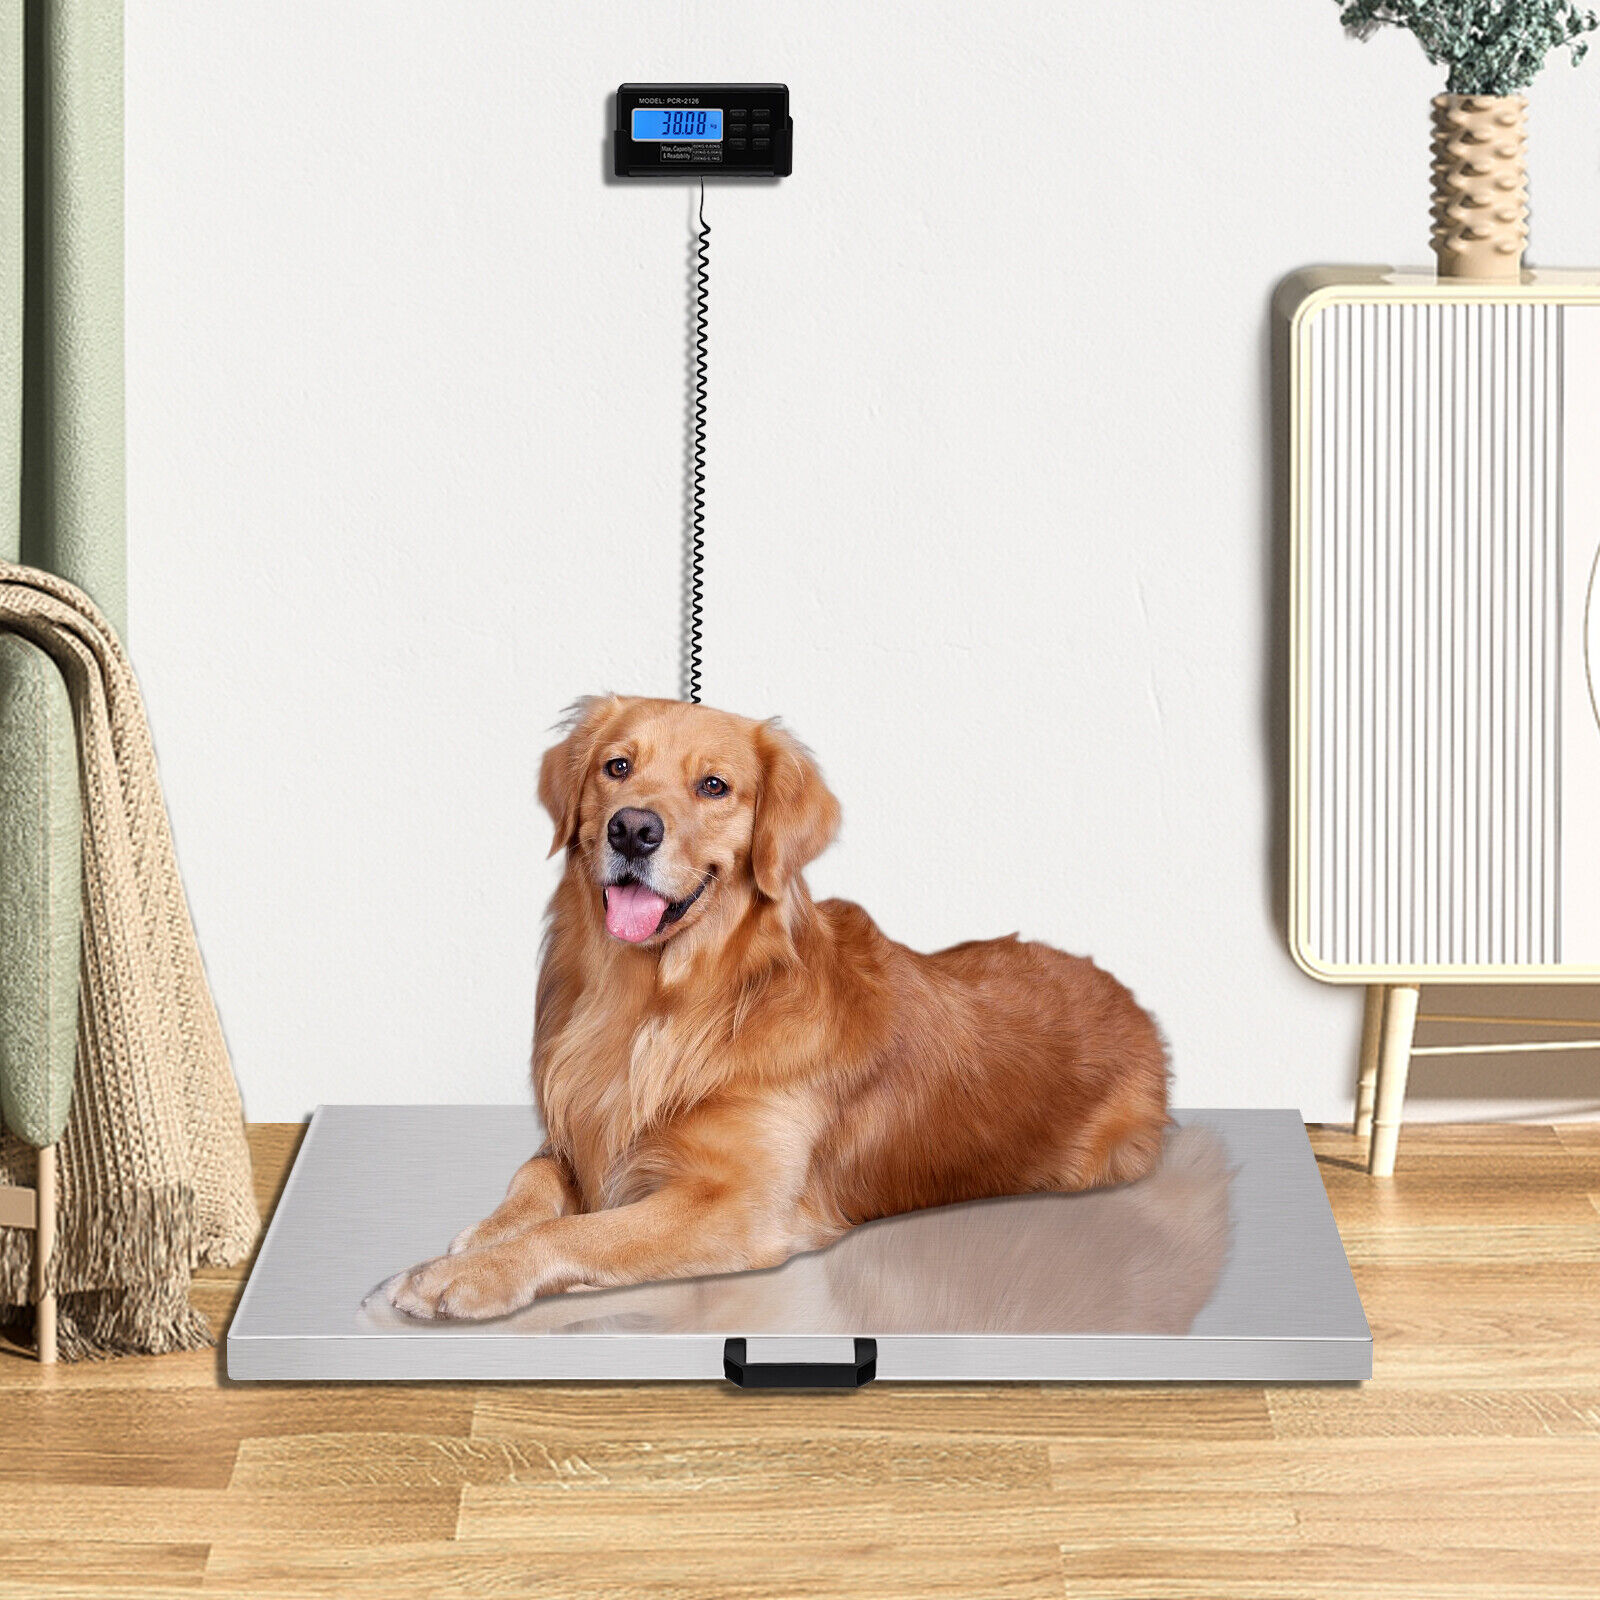 LARGE 440LB Dog Digital Pet Weight Scale for Shipping Veterinary Livestock NEW